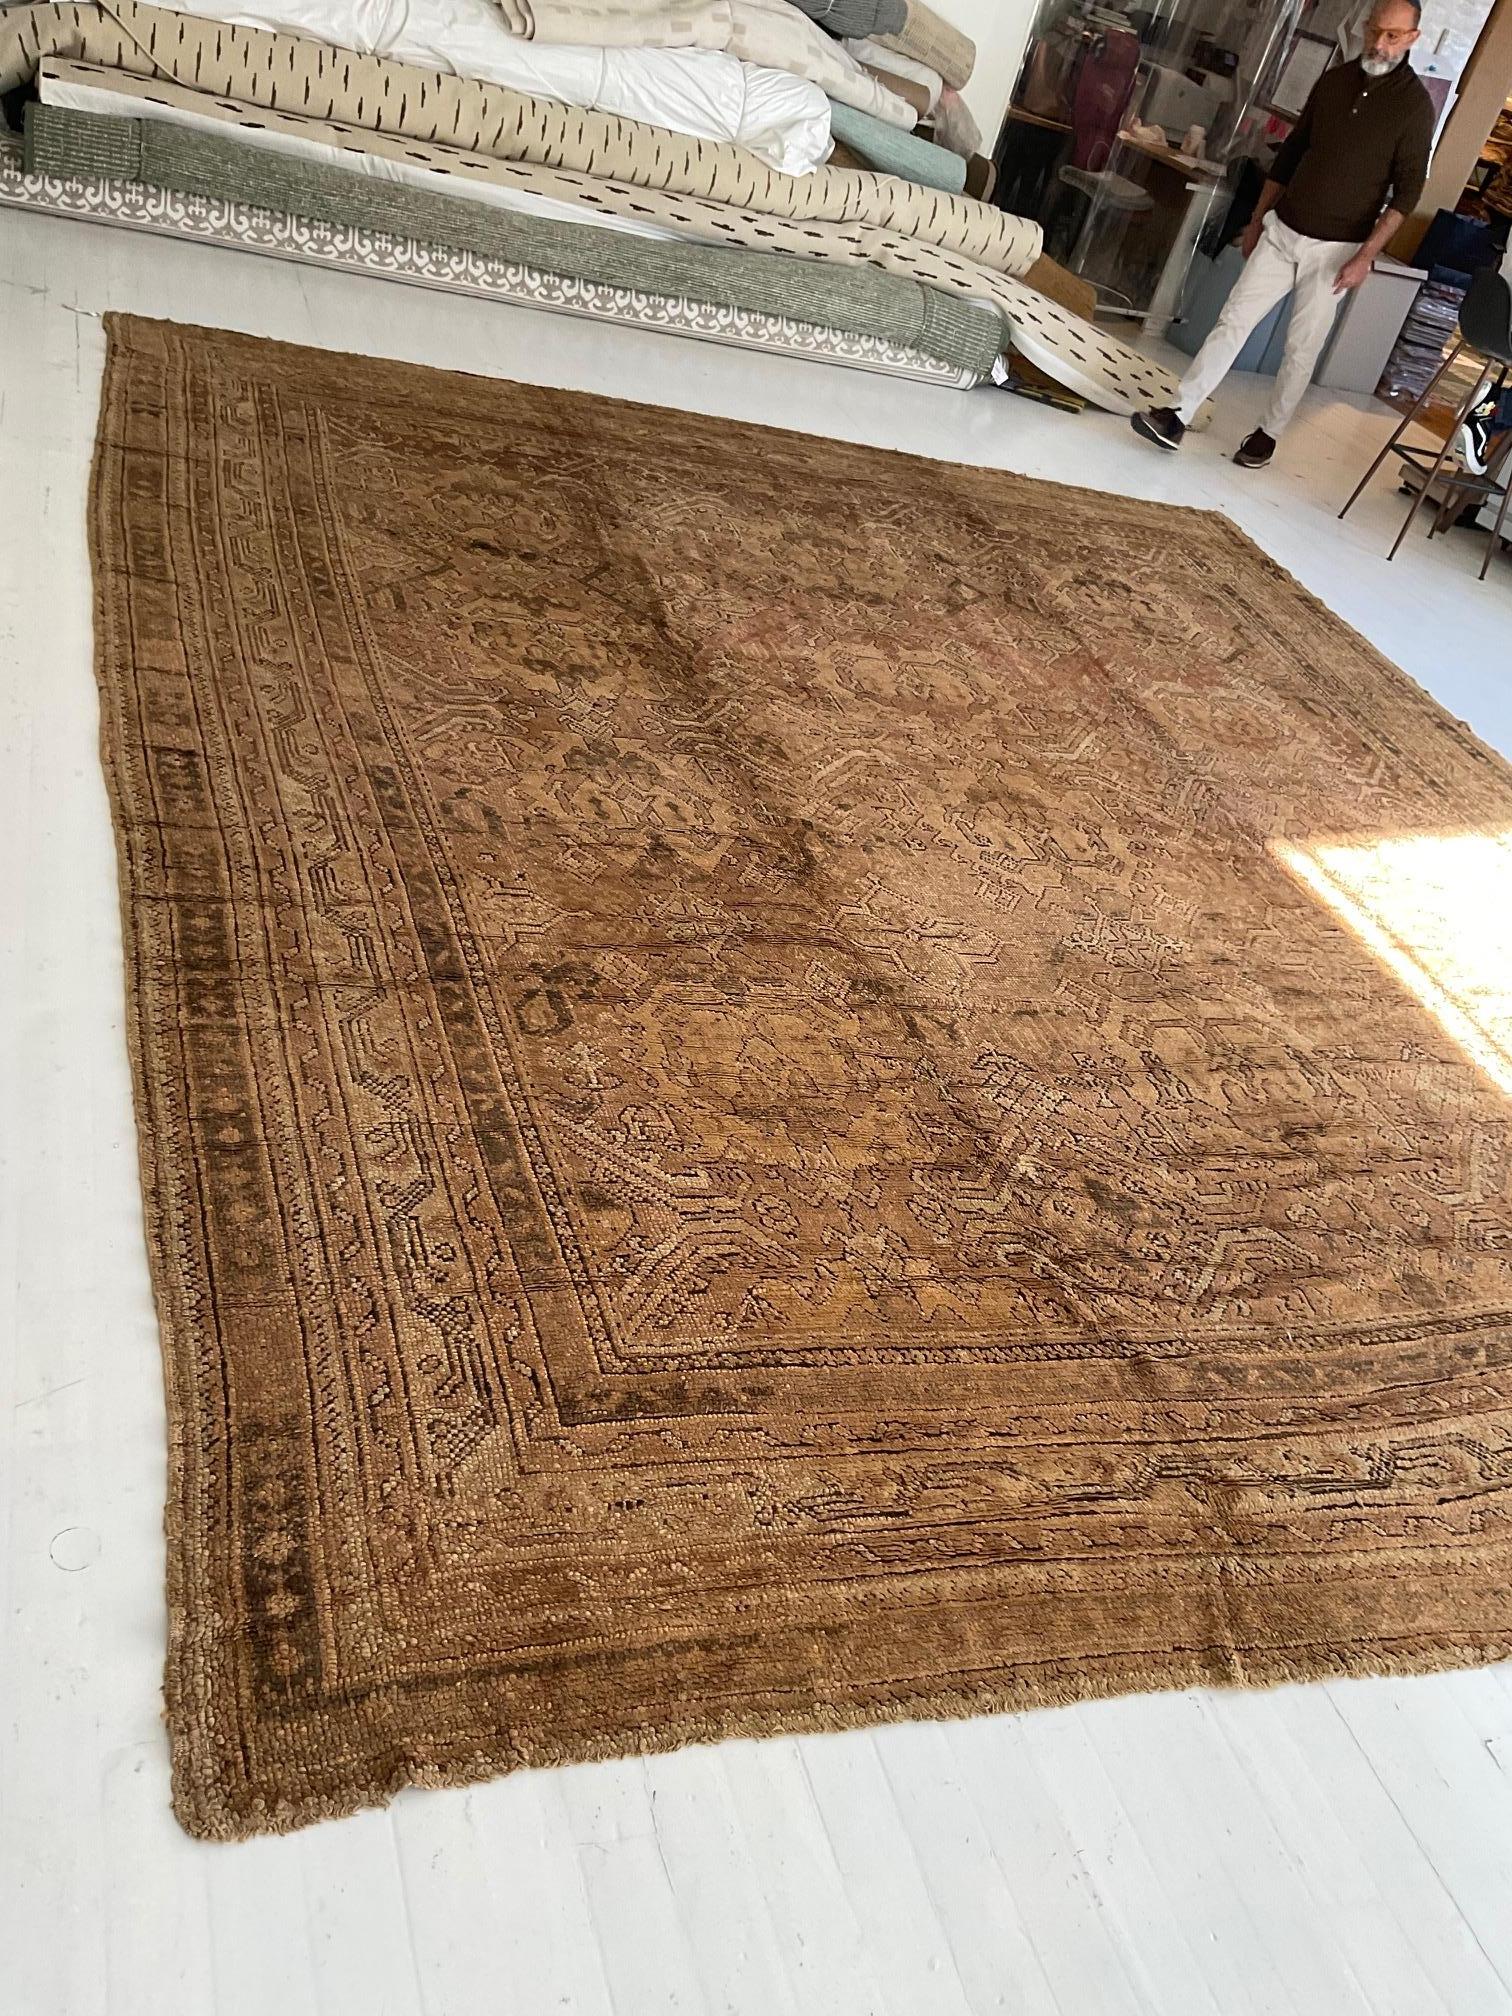 Early 20th century oushak brown handmade wool rug
Size: 12'6